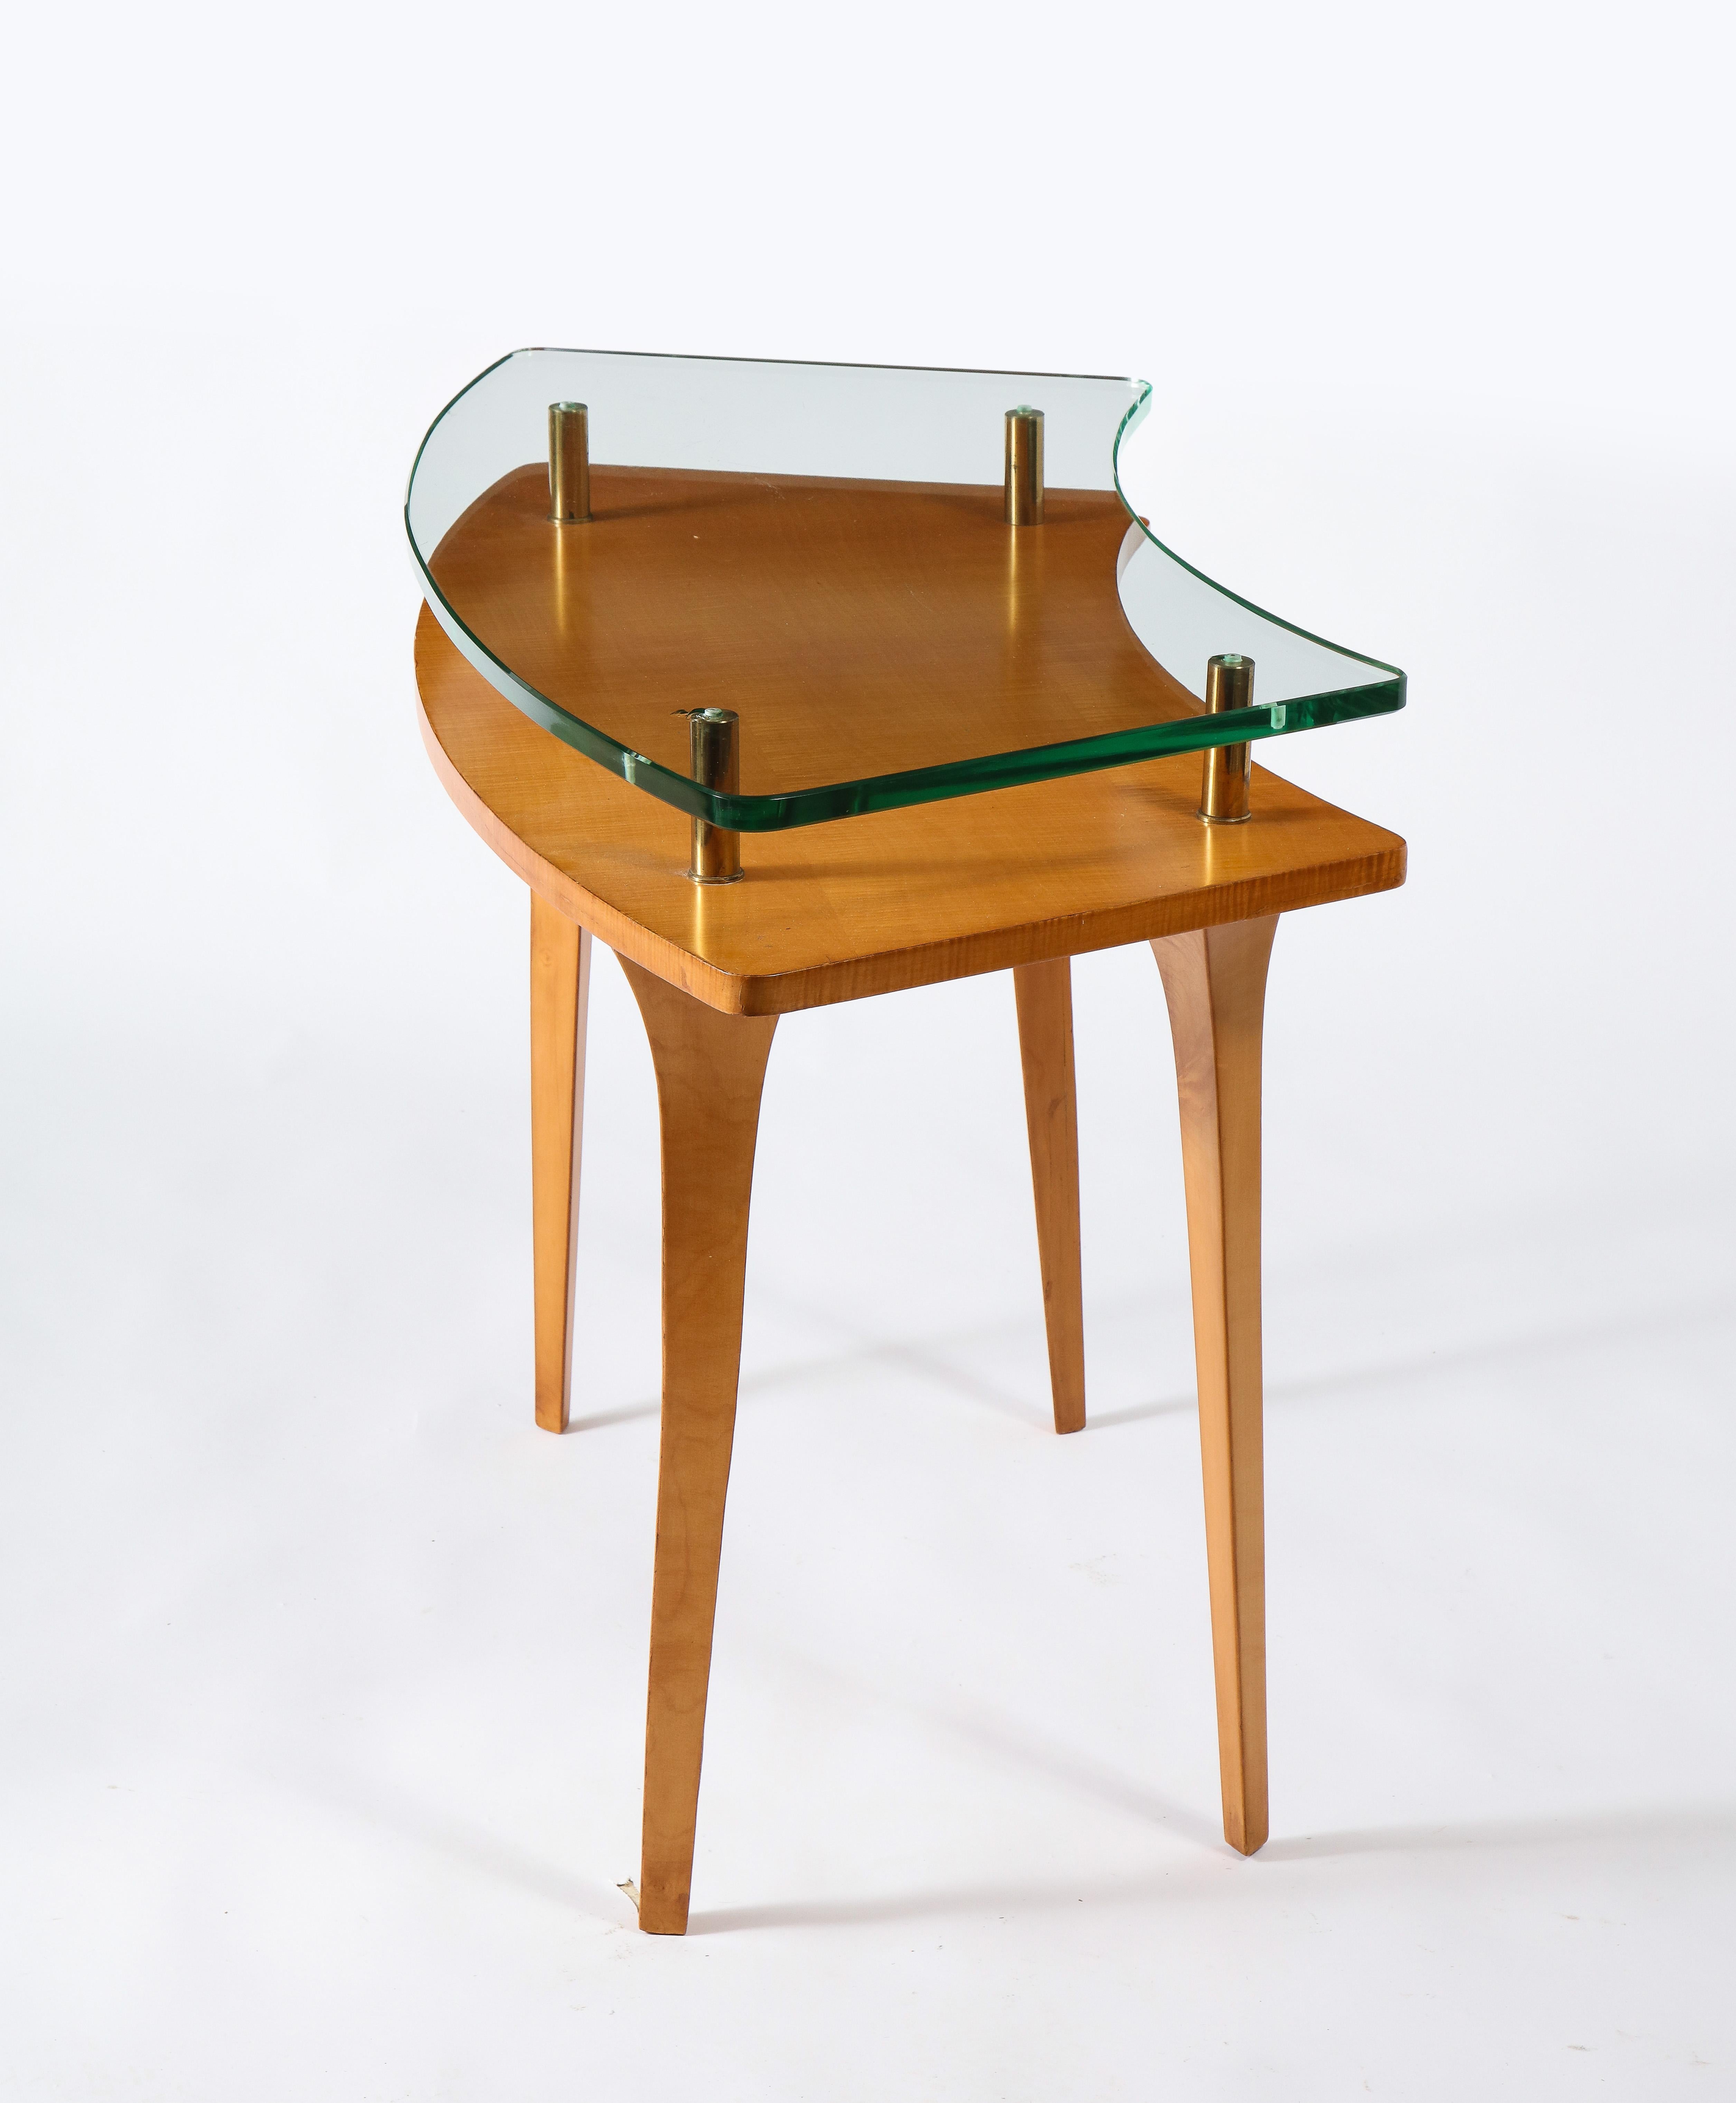 French Raphael Raffel Vanity or Writing Desk in Sycamore and Glass, France 1950s For Sale